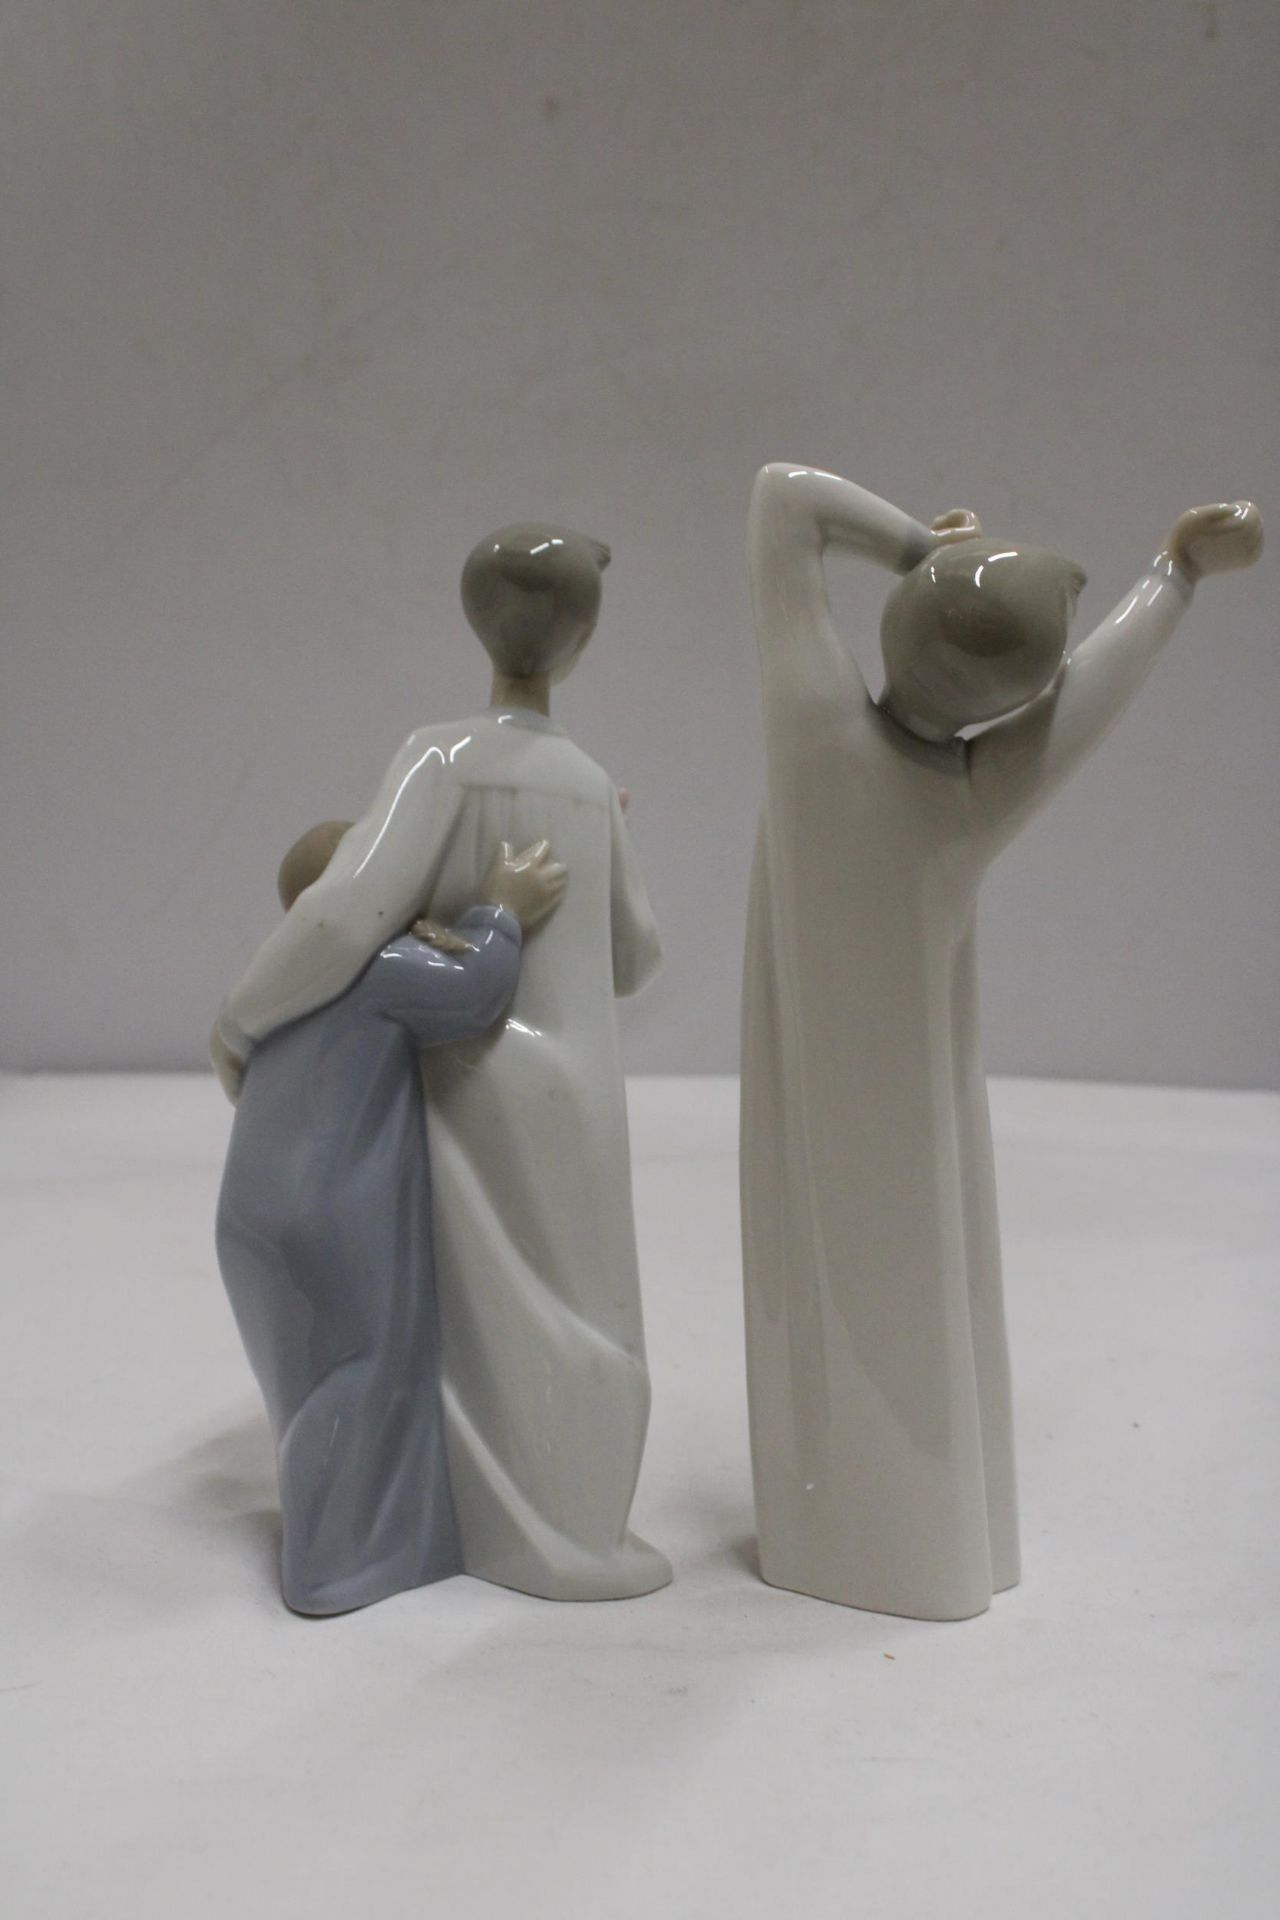 TWO LLADRO FIGURES IN NIGHTGOWNS - Image 4 of 7